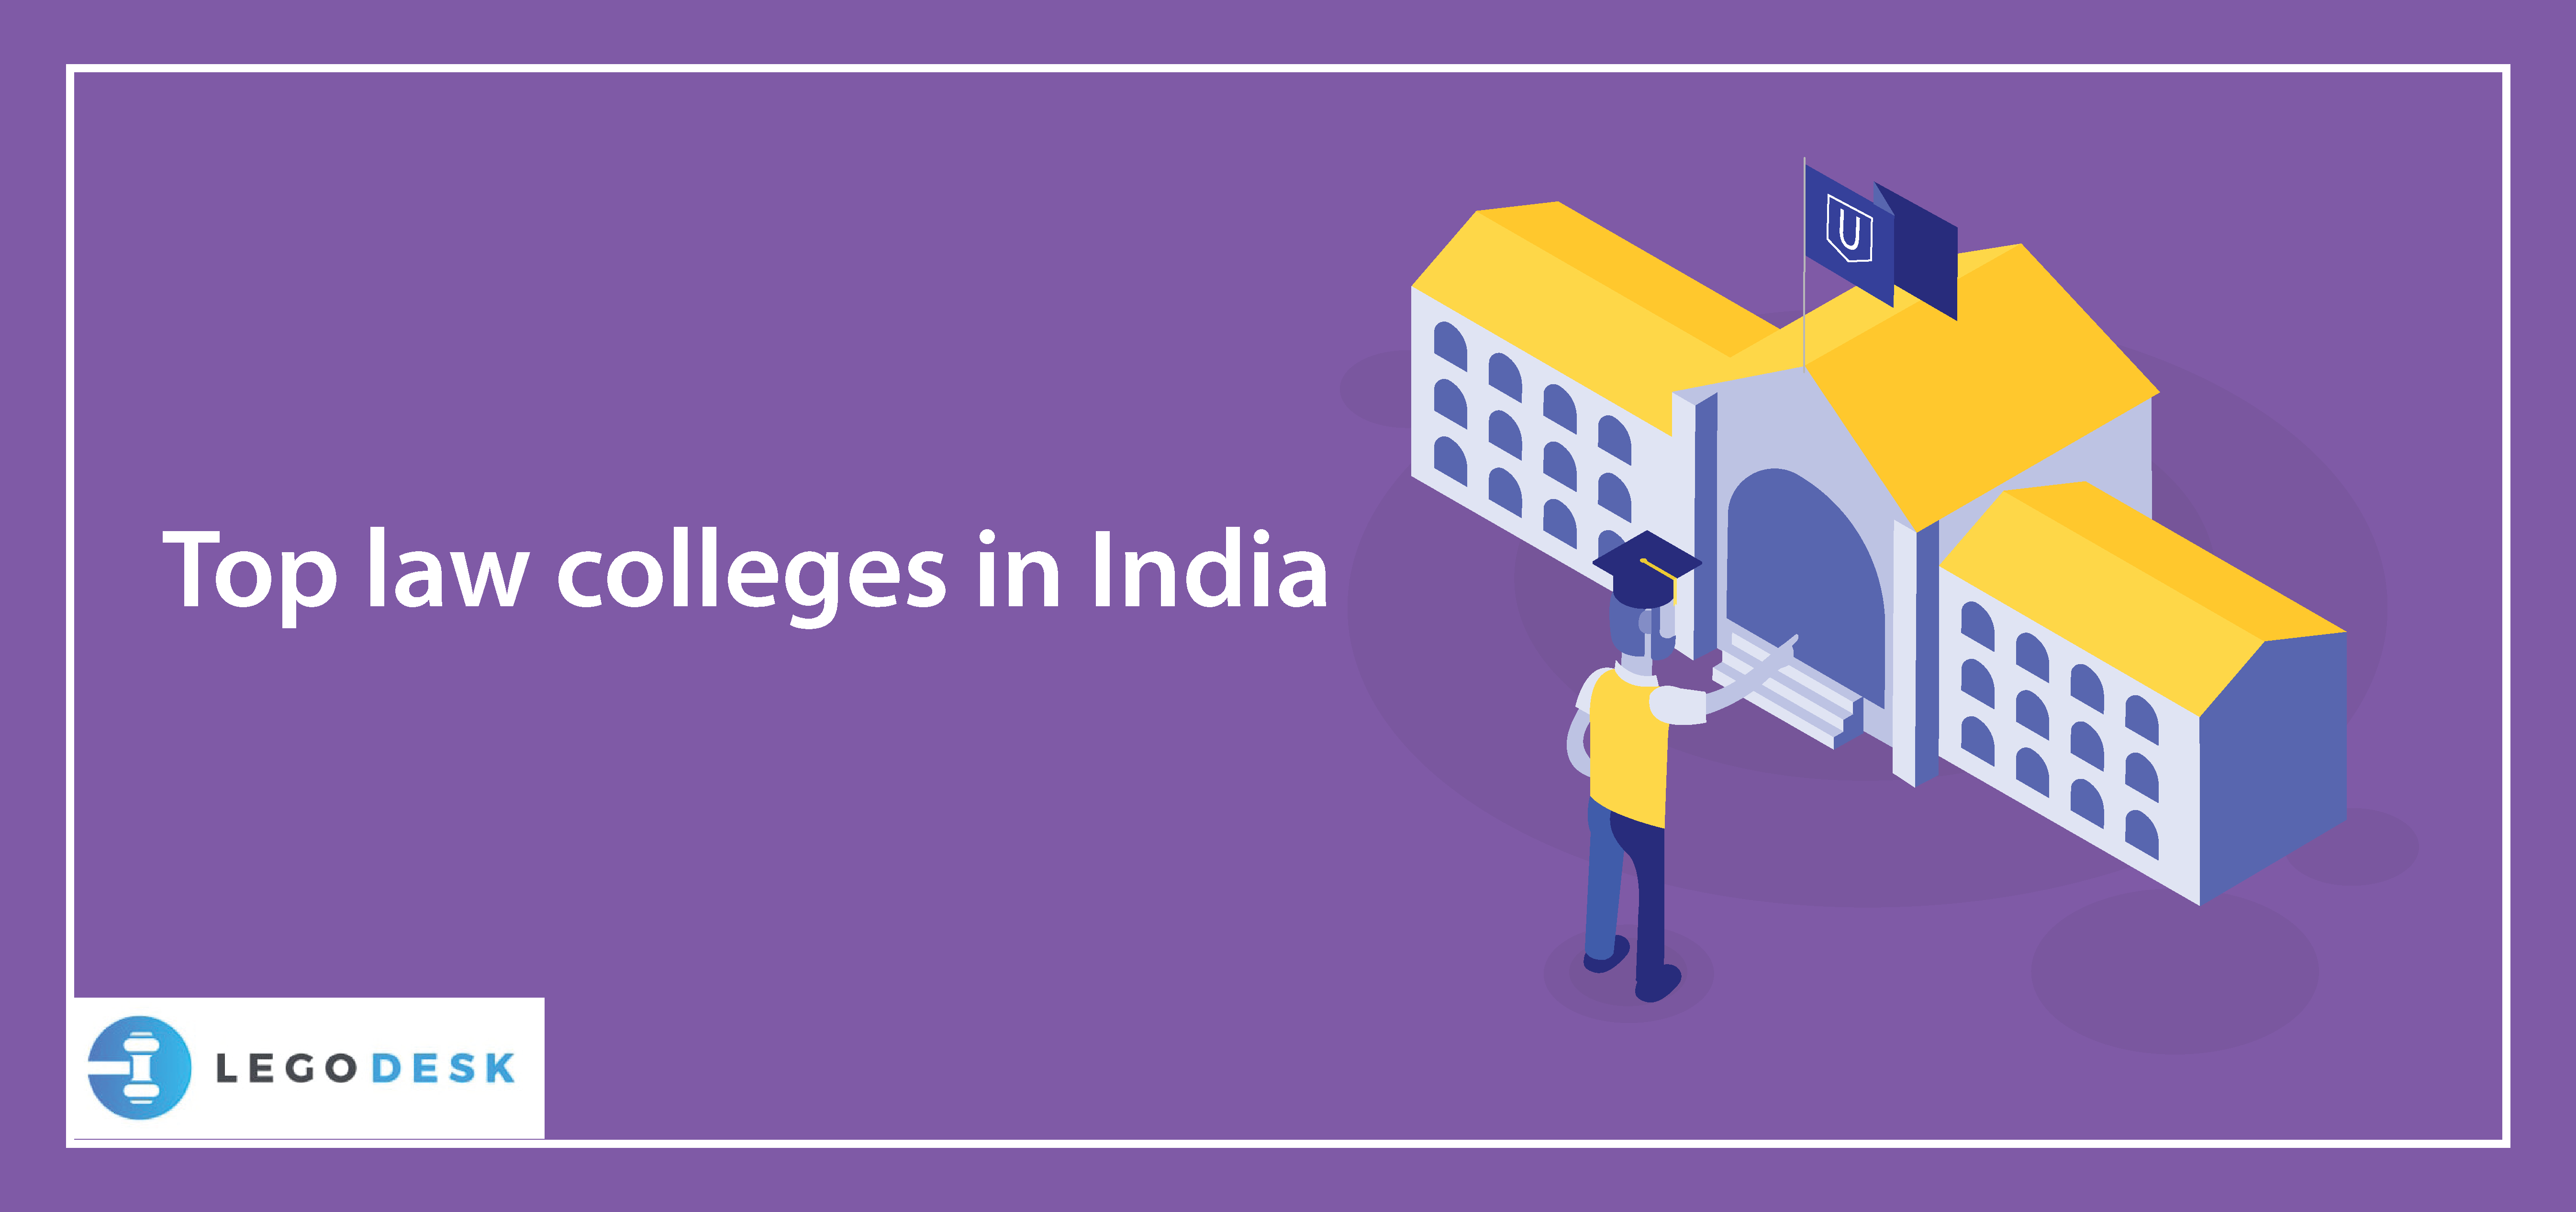 Top Eight law colleges in India